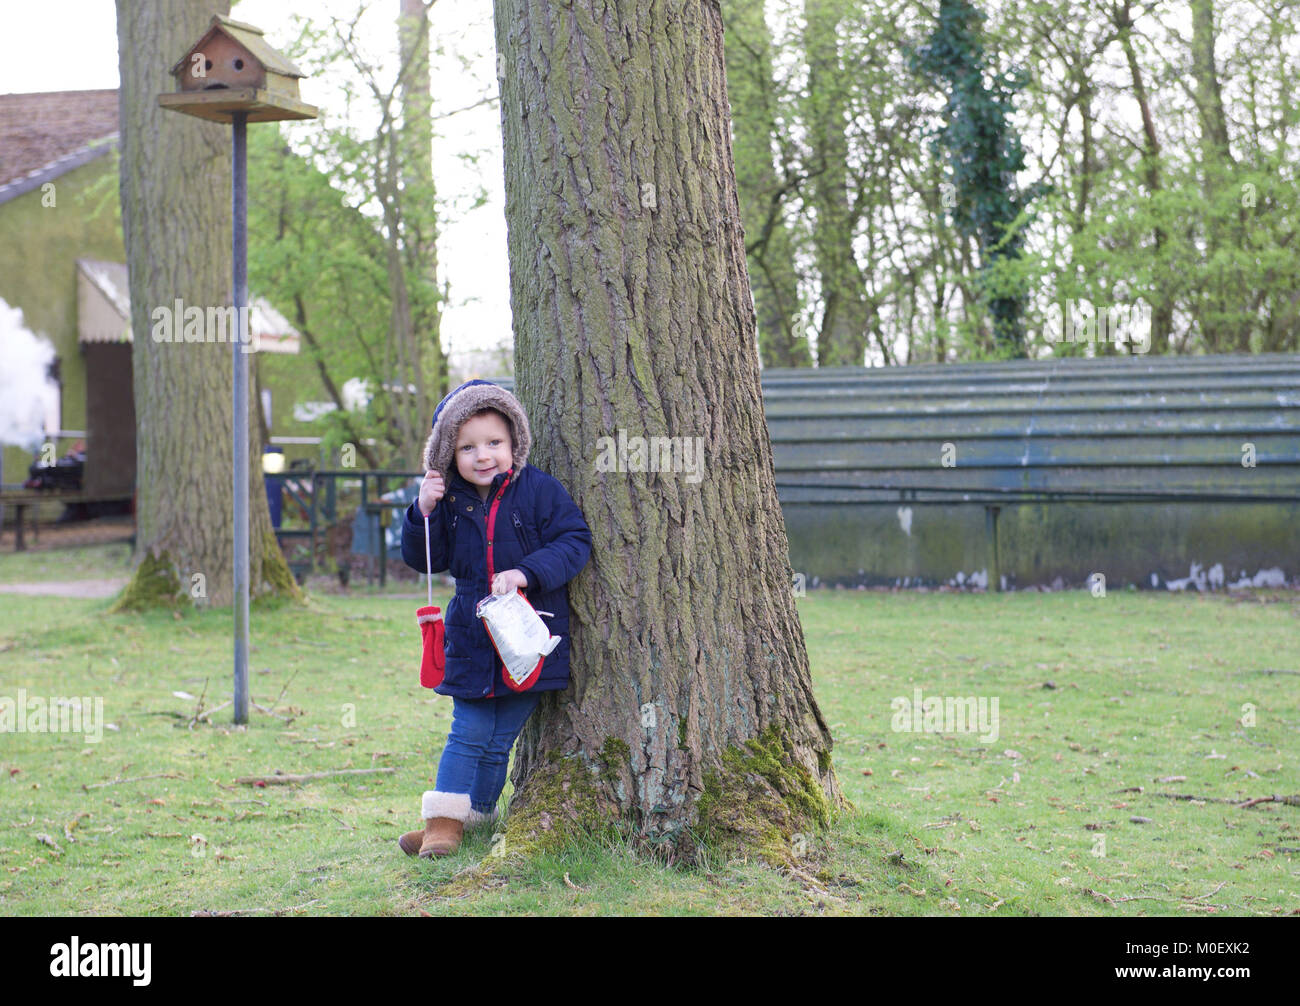 Girl standing in a public park holding a bag of crisps Stock Photo